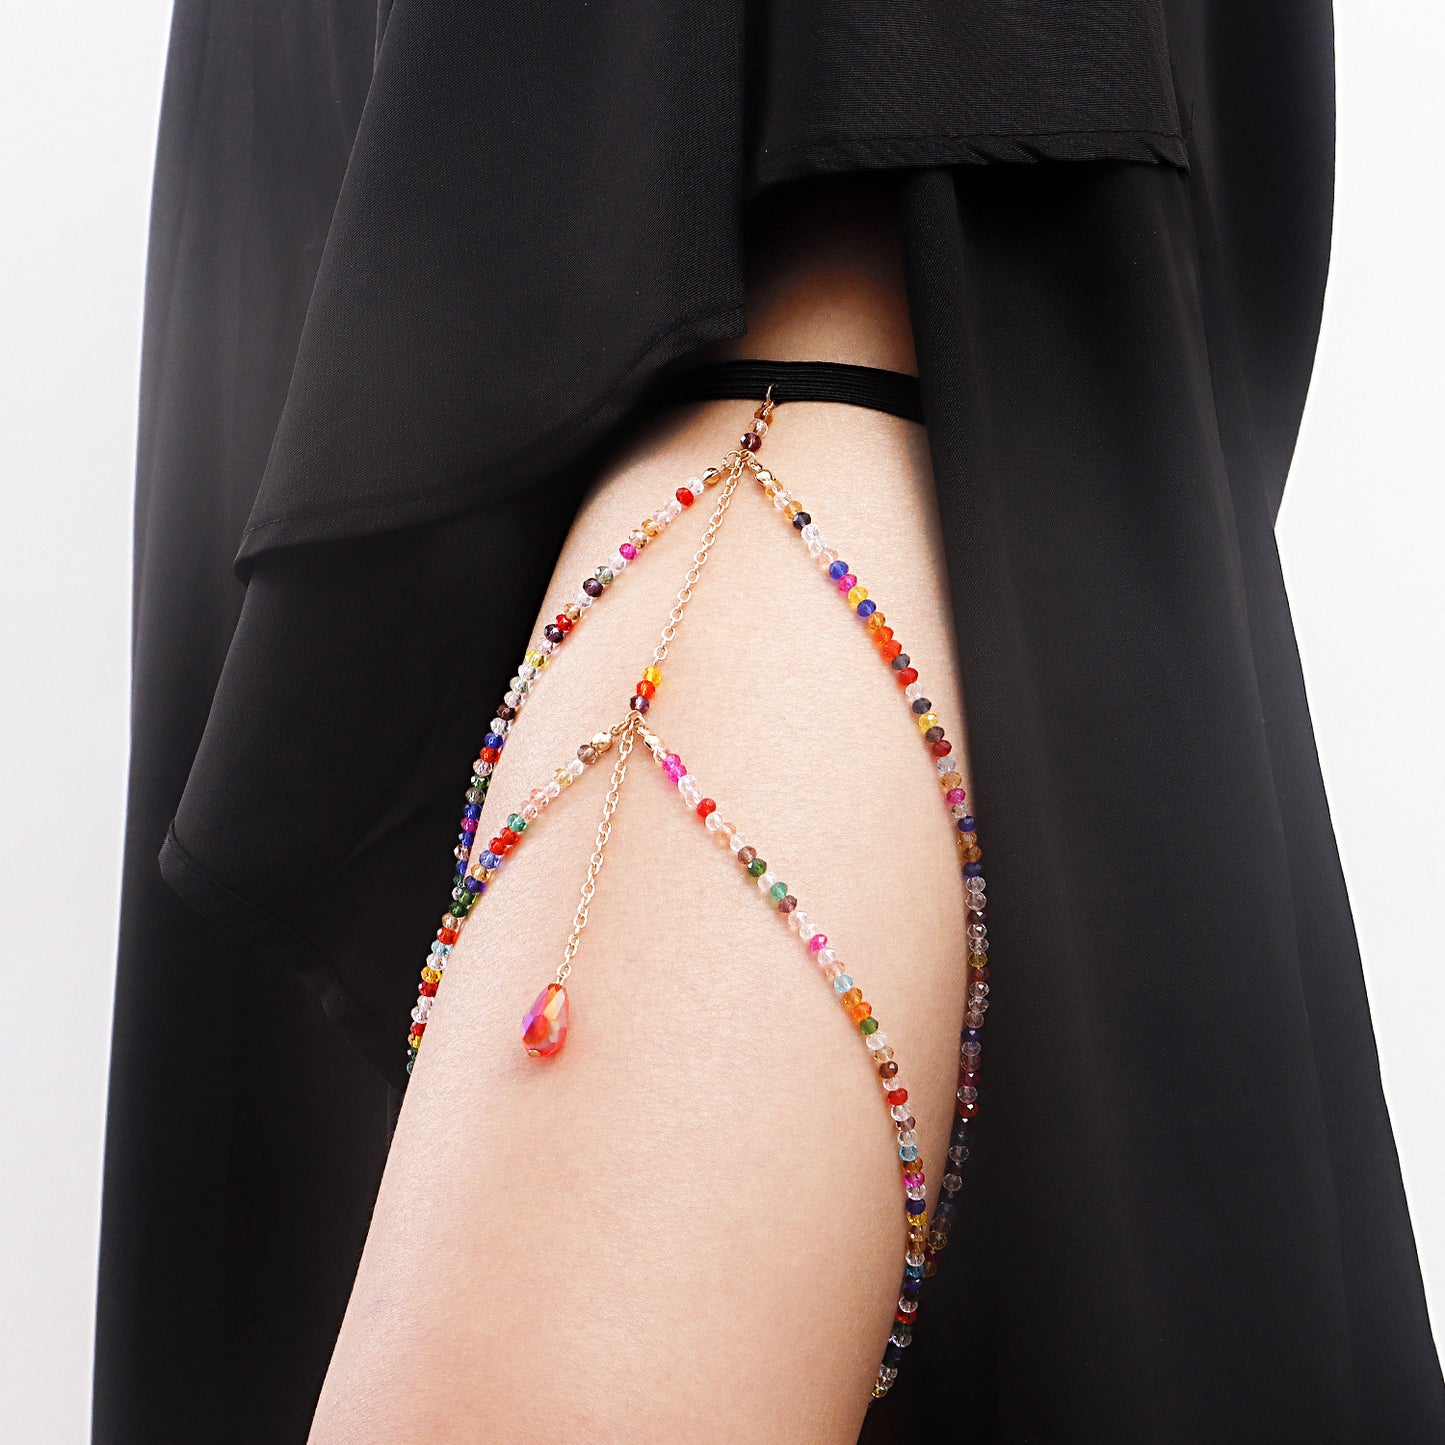 Thigh Ring Colorful Crystal Beads Casual Body Chain